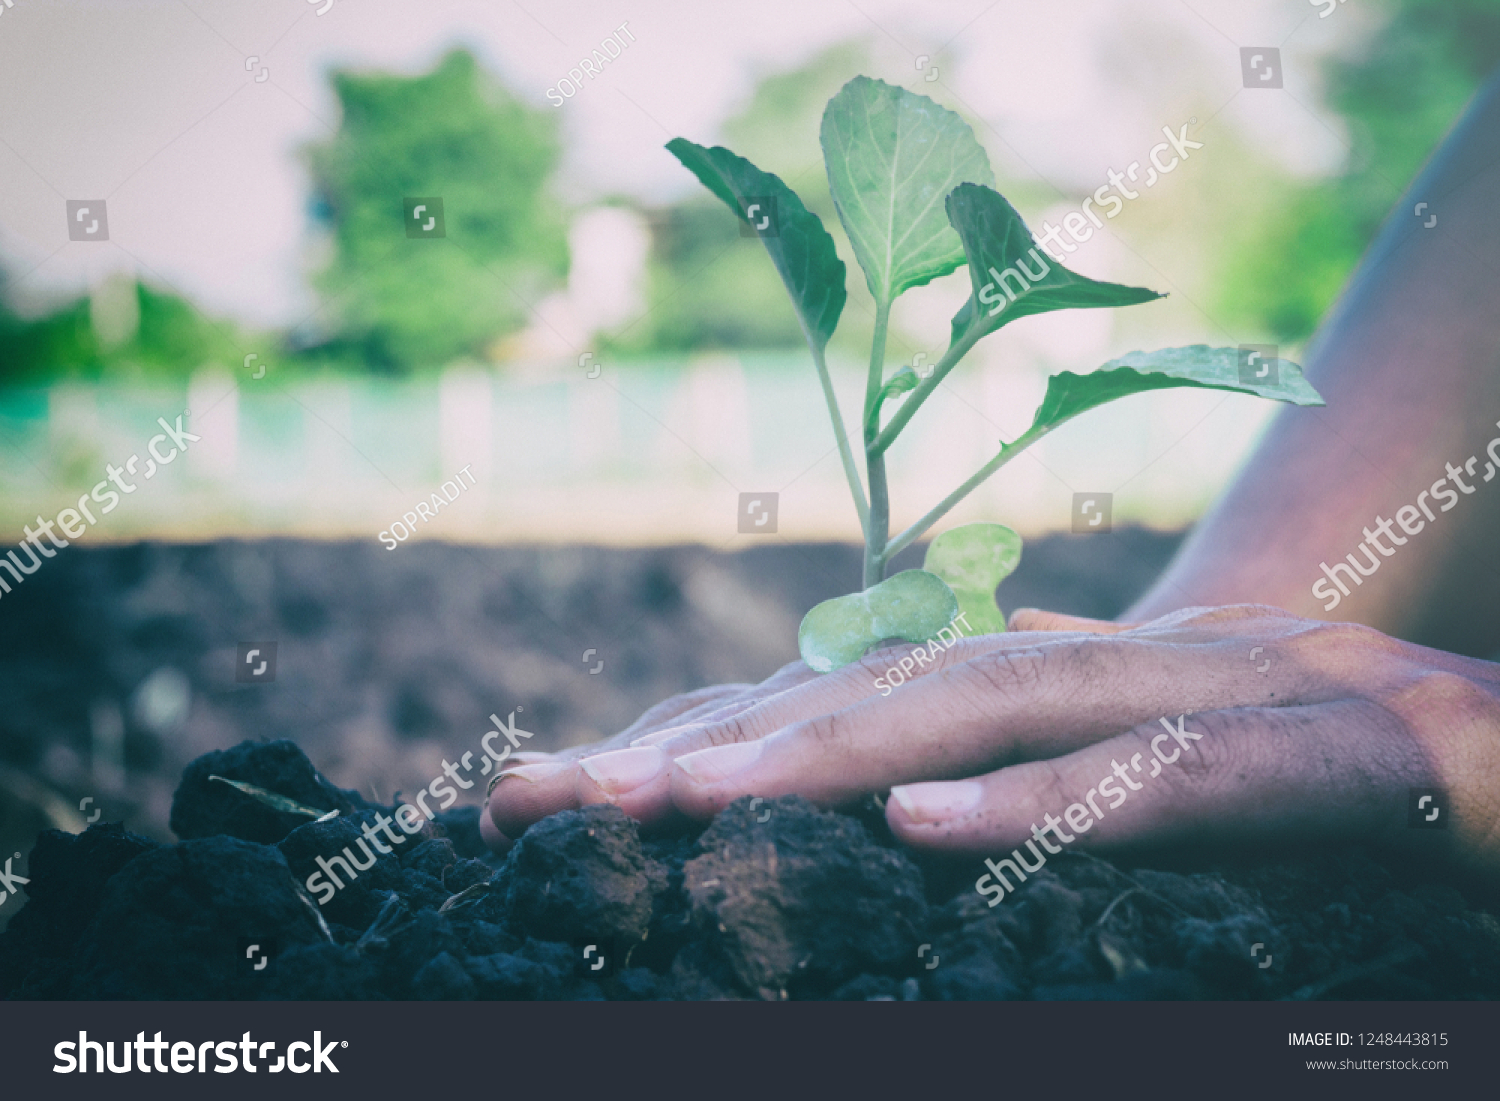 Hands holding cabbage Prepare the planting to grow.Growth concetp. #1248443815